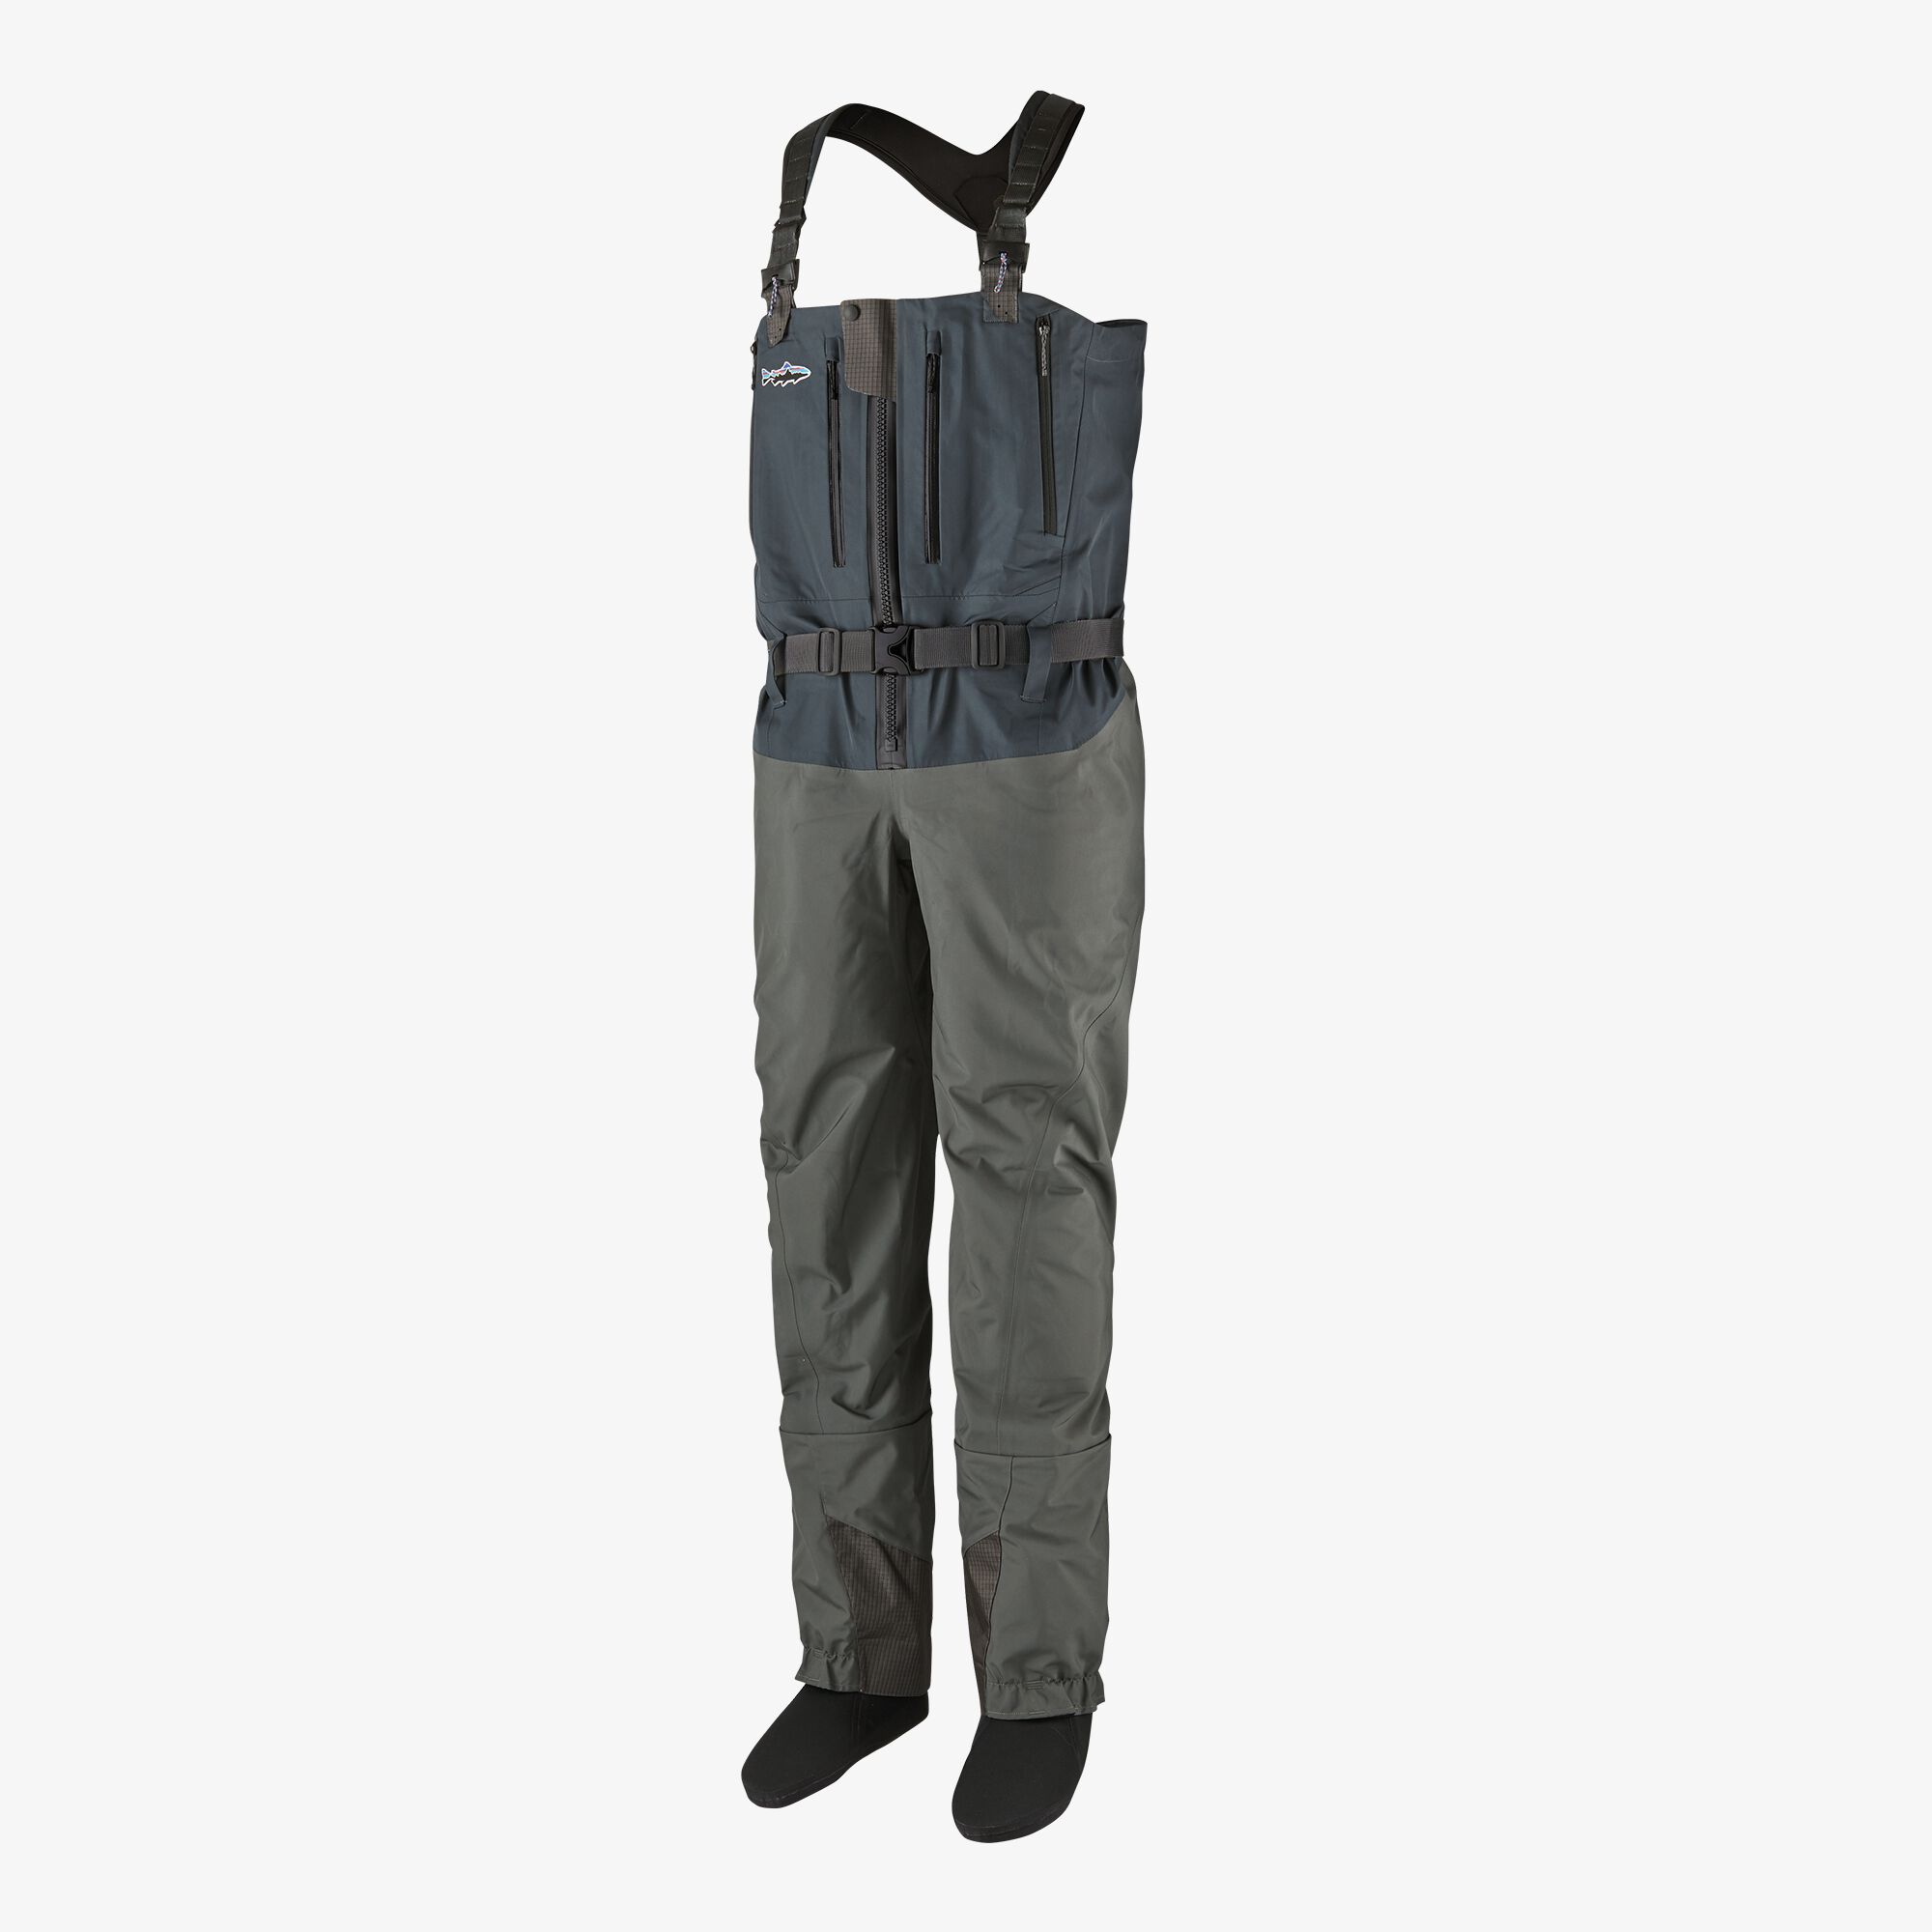 PATAGONIA SWIFTCURRENT EXPEDITION ZIP-FRONT WADER - MRL